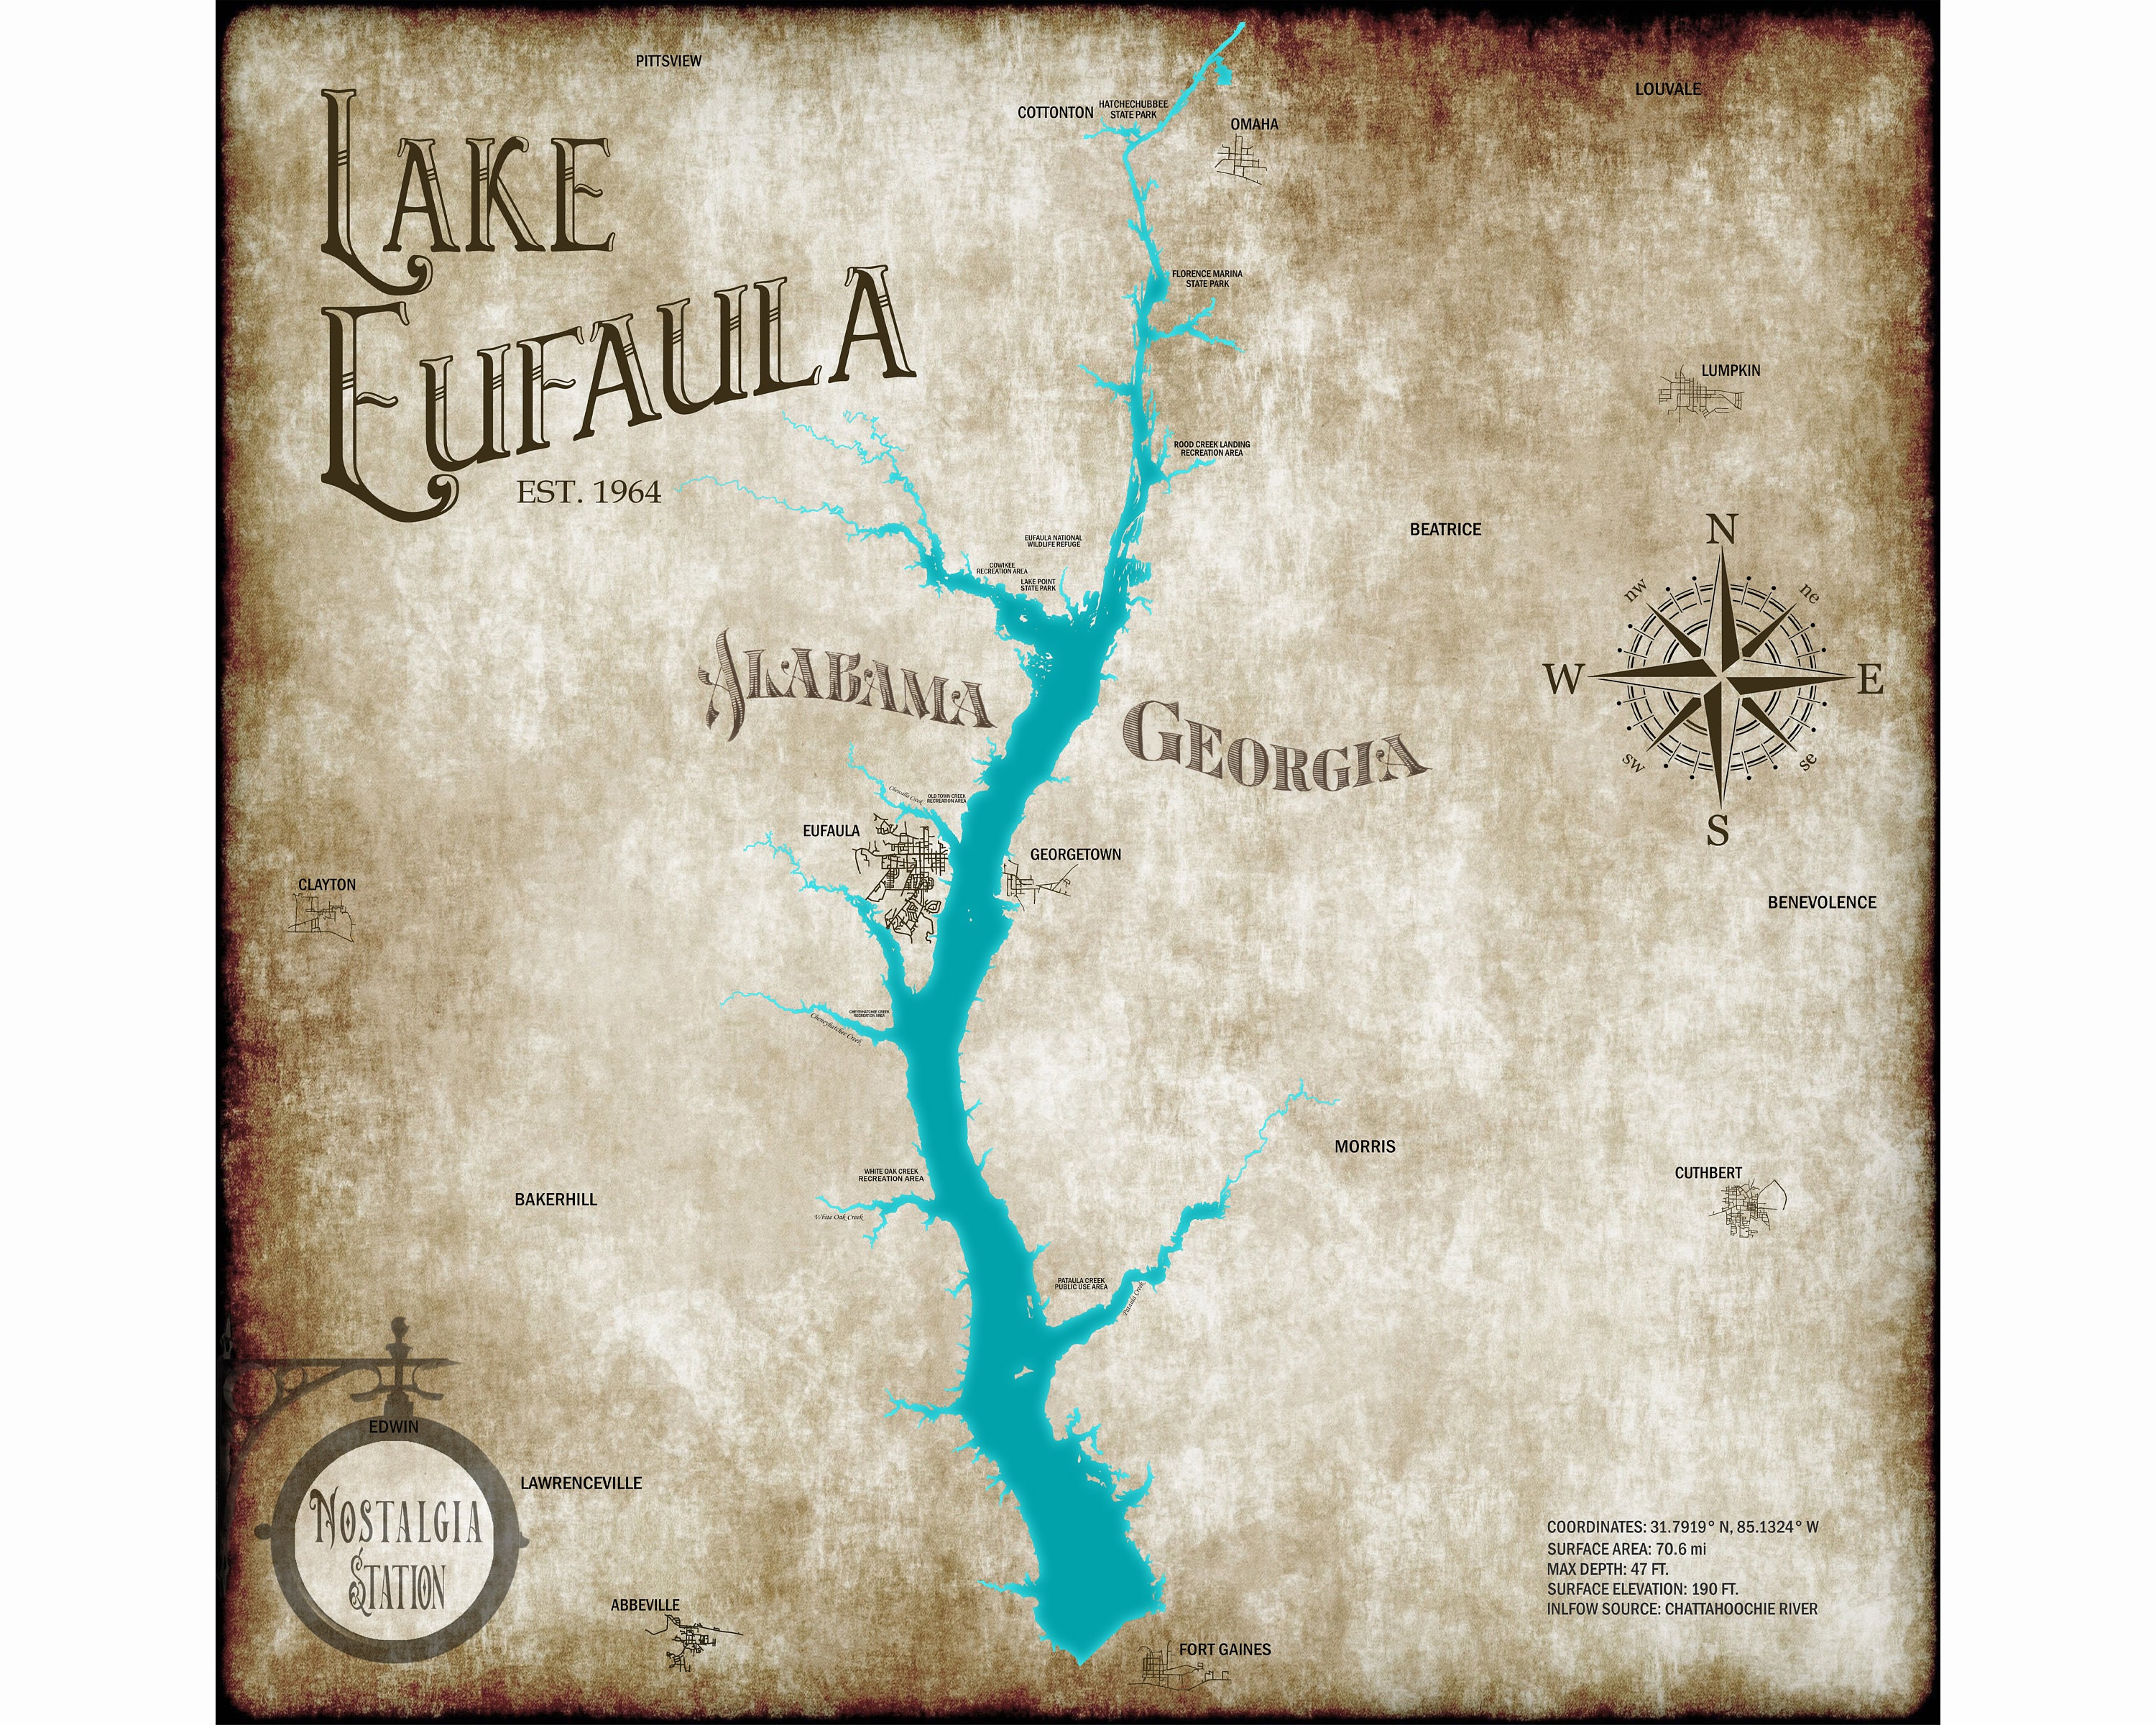 Eufaula Calm 11X14 Black and White acrylic paint on stretched unframed  canvas. Hand painted one of a kind great gift ready to hang